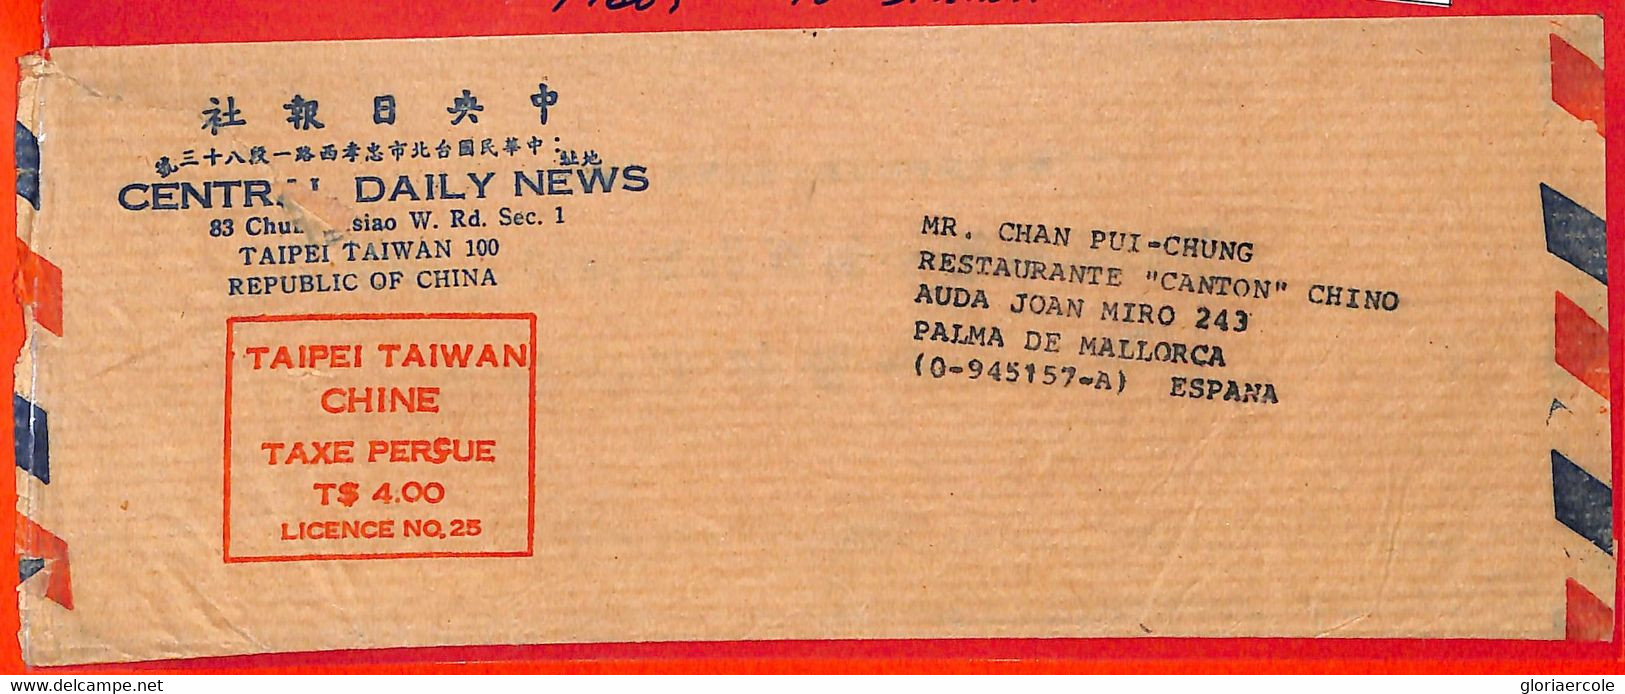 Aa2205 - CHINA Taiwan - Postal HISTORY - LARGE Cover To SPAIN - 1960's  TAXED! - Storia Postale